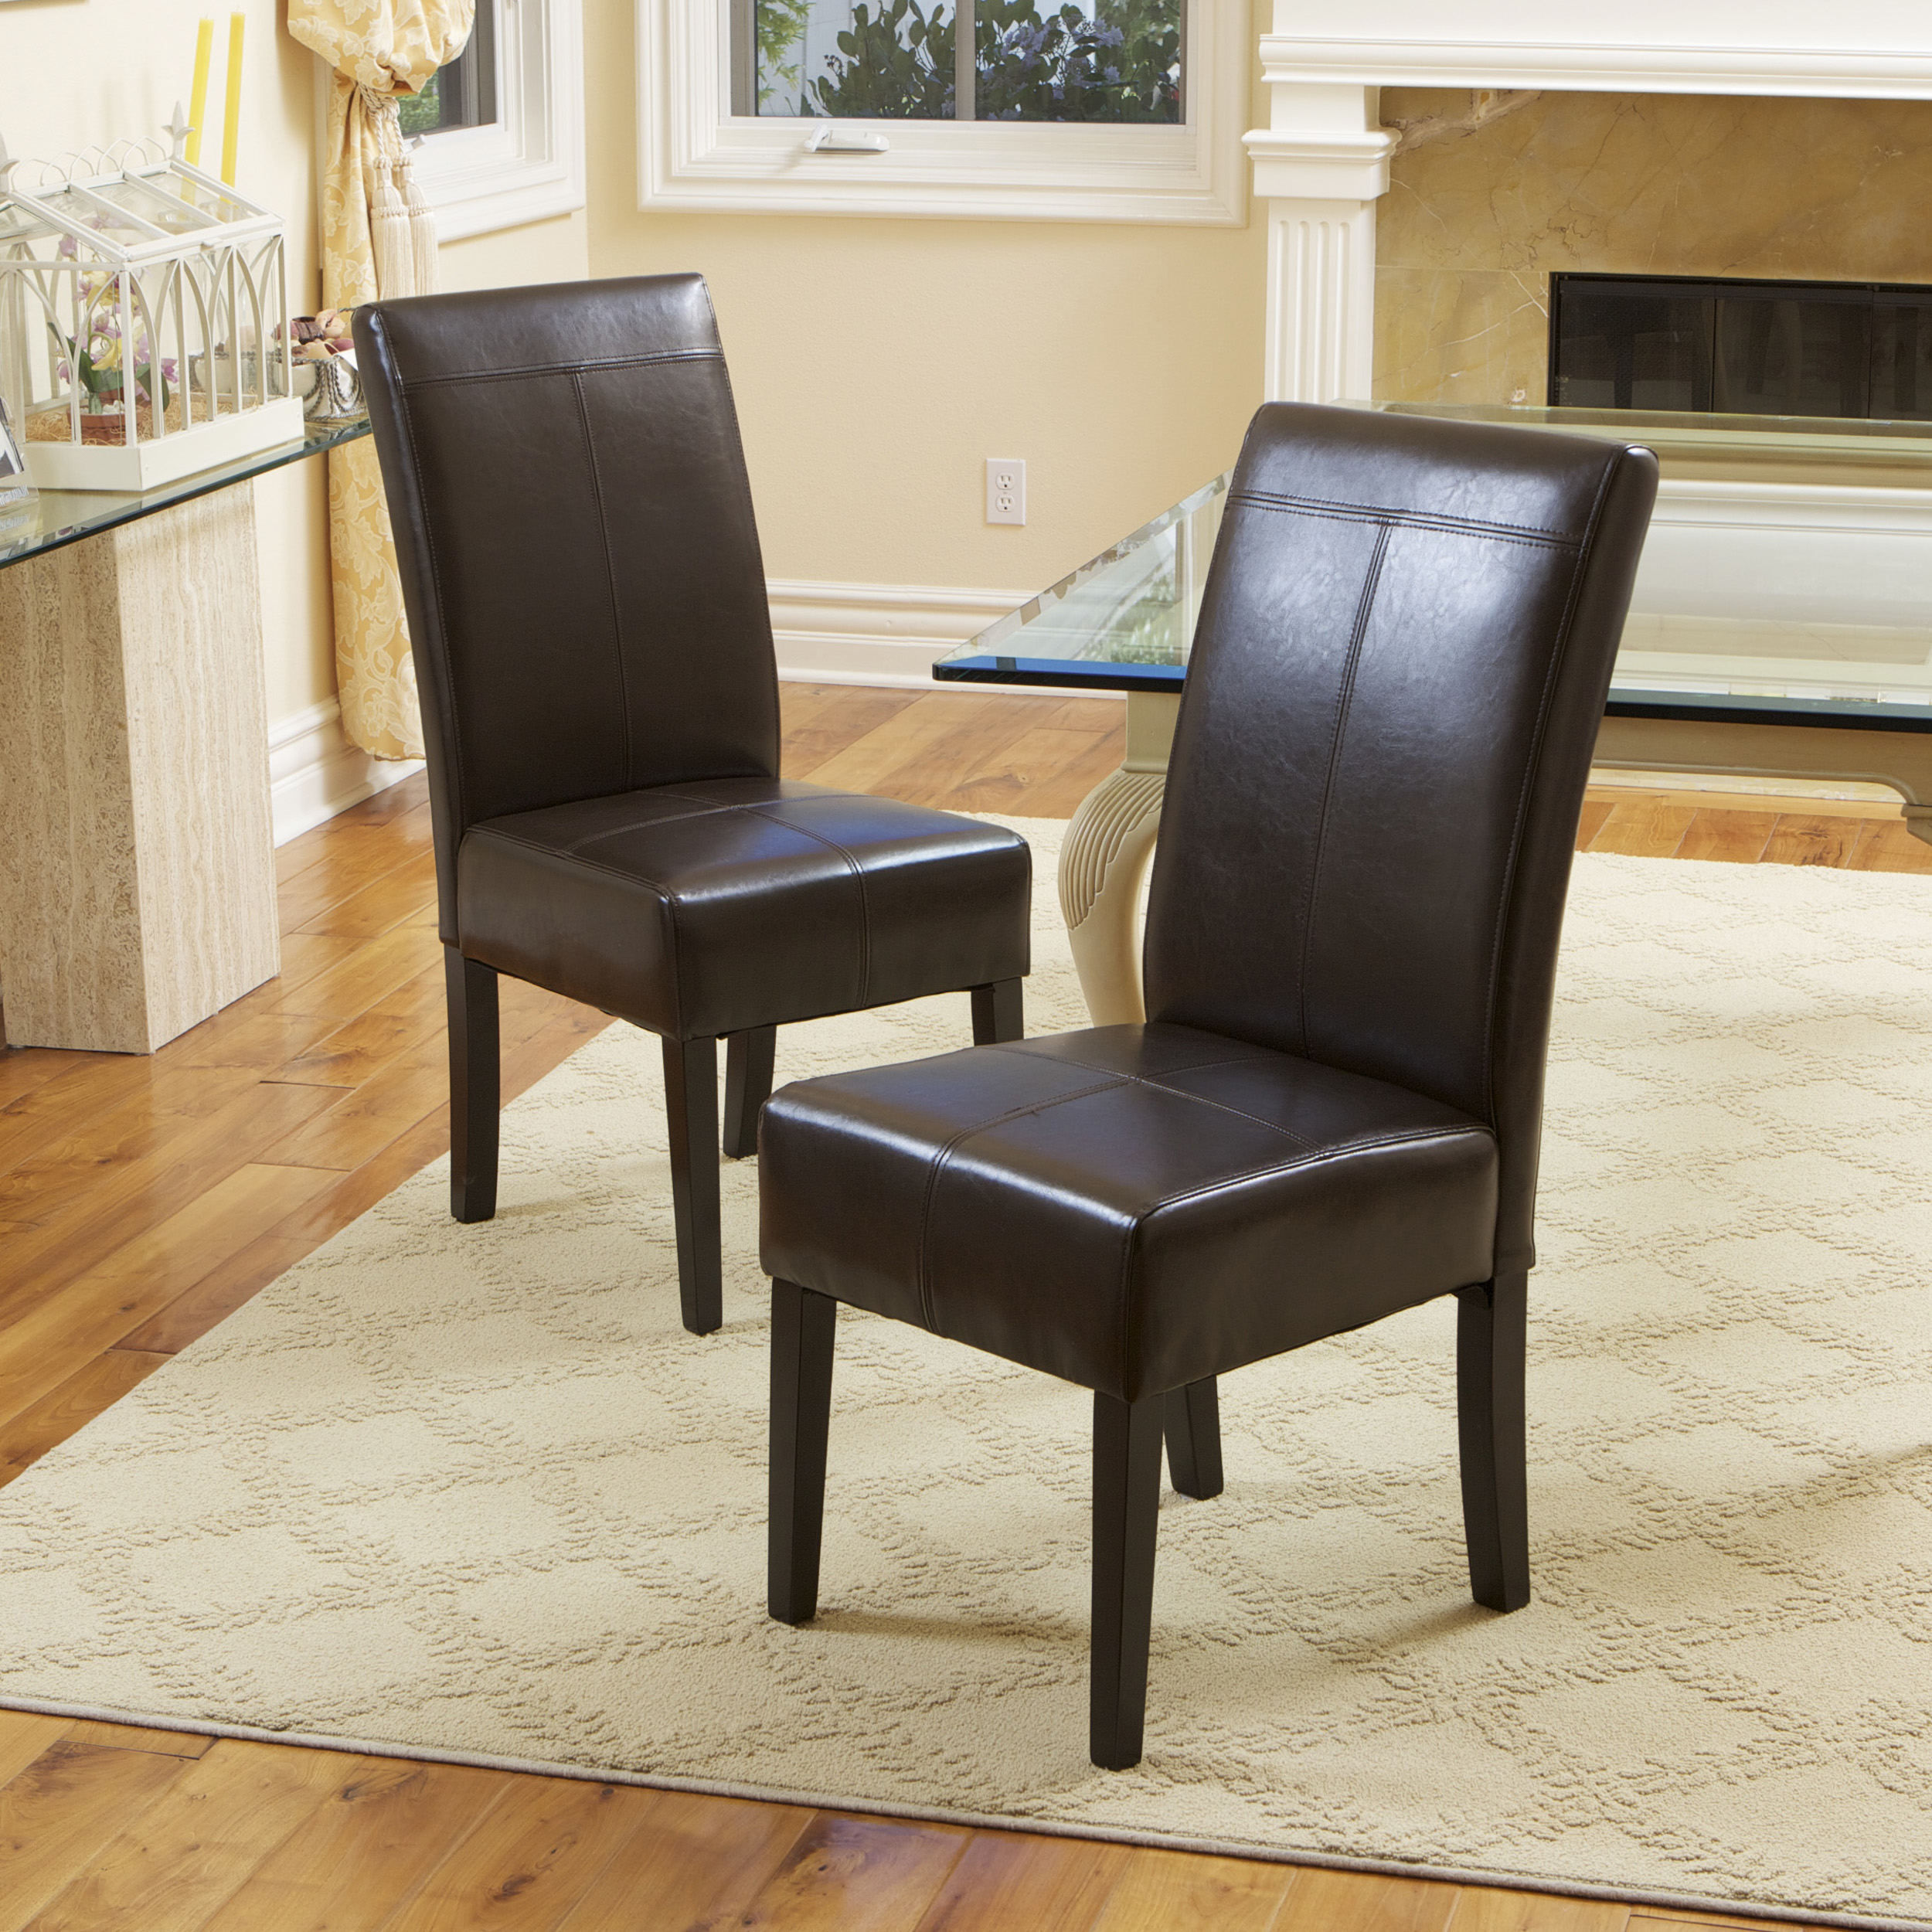 Lissa Contemporary T-Stitch Upholstered Dining Chairs (Set Of 2) - Brown, Leather